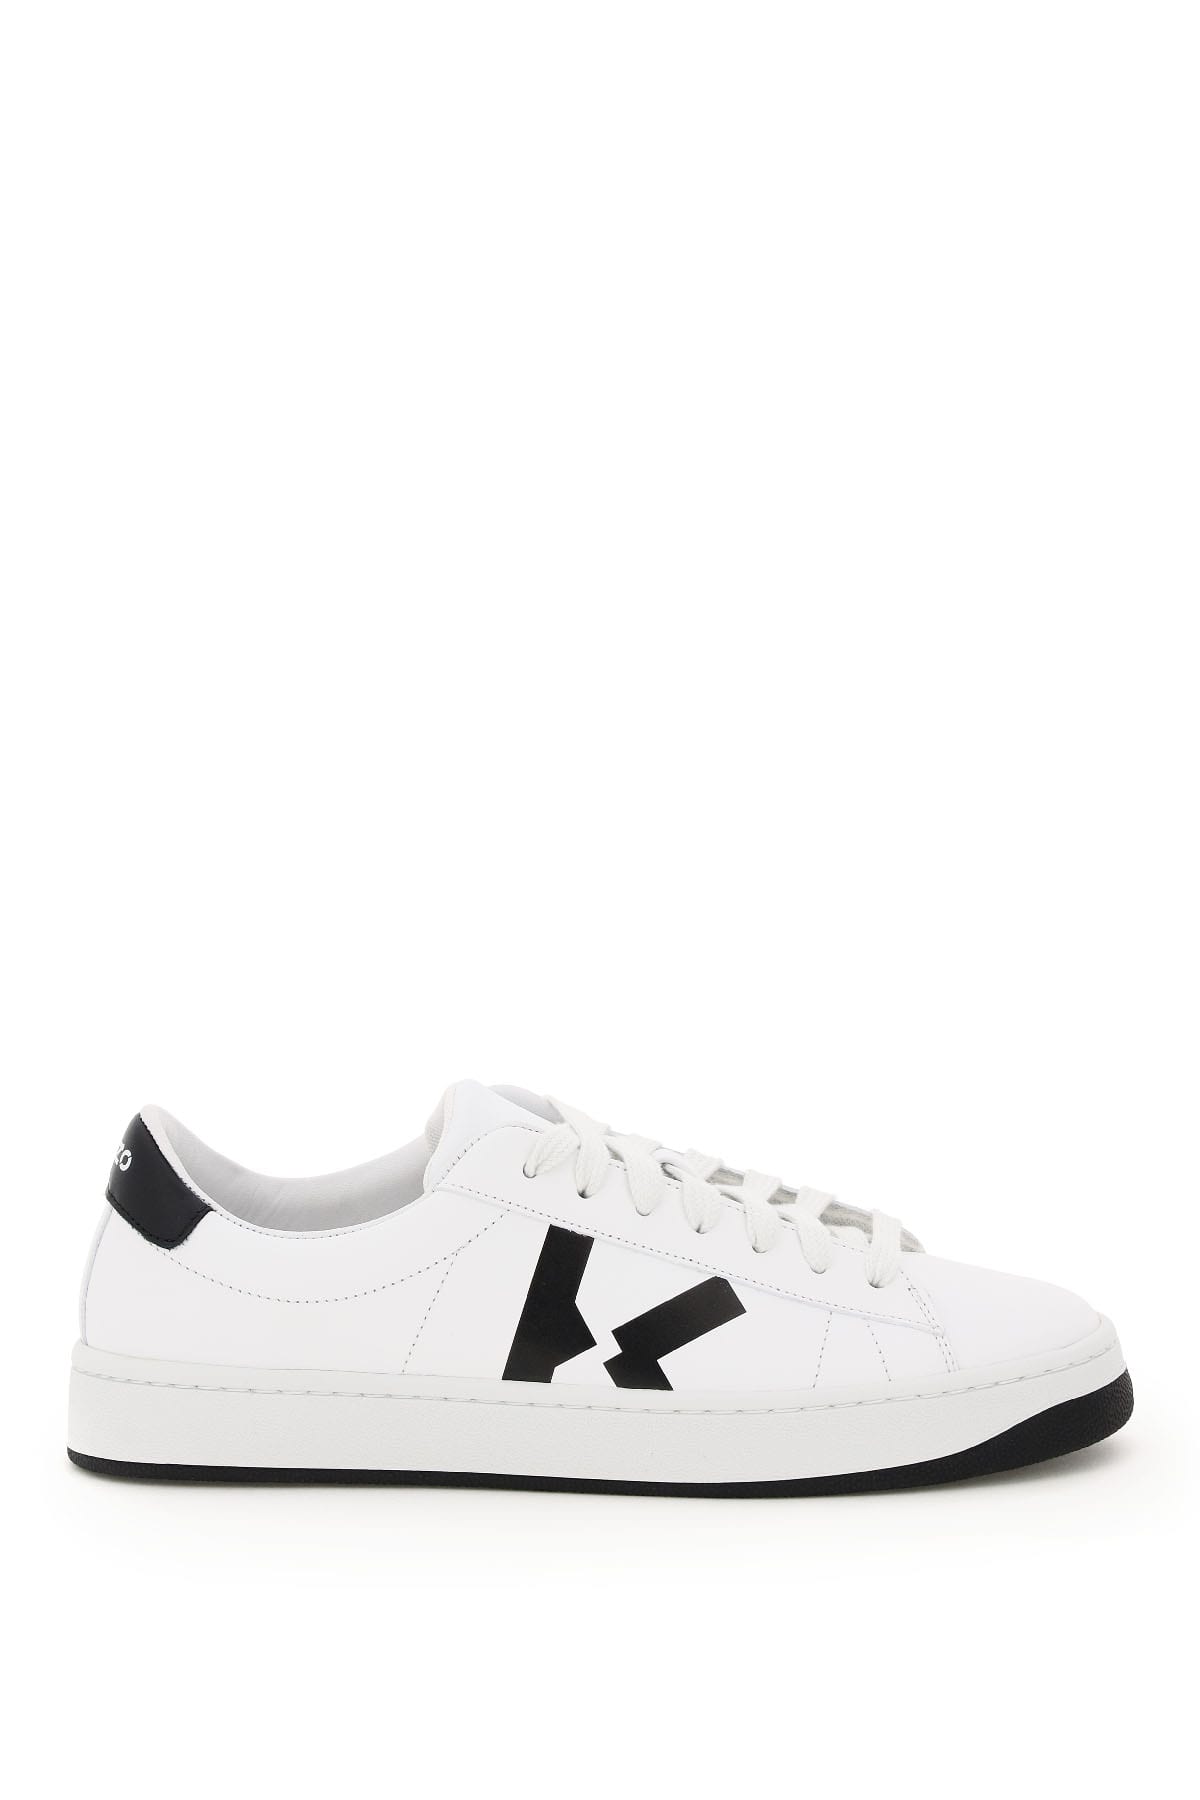 Buy Kenzo Kenzo Kourt Leather Sneakers online, shop Kenzo shoes with free shipping